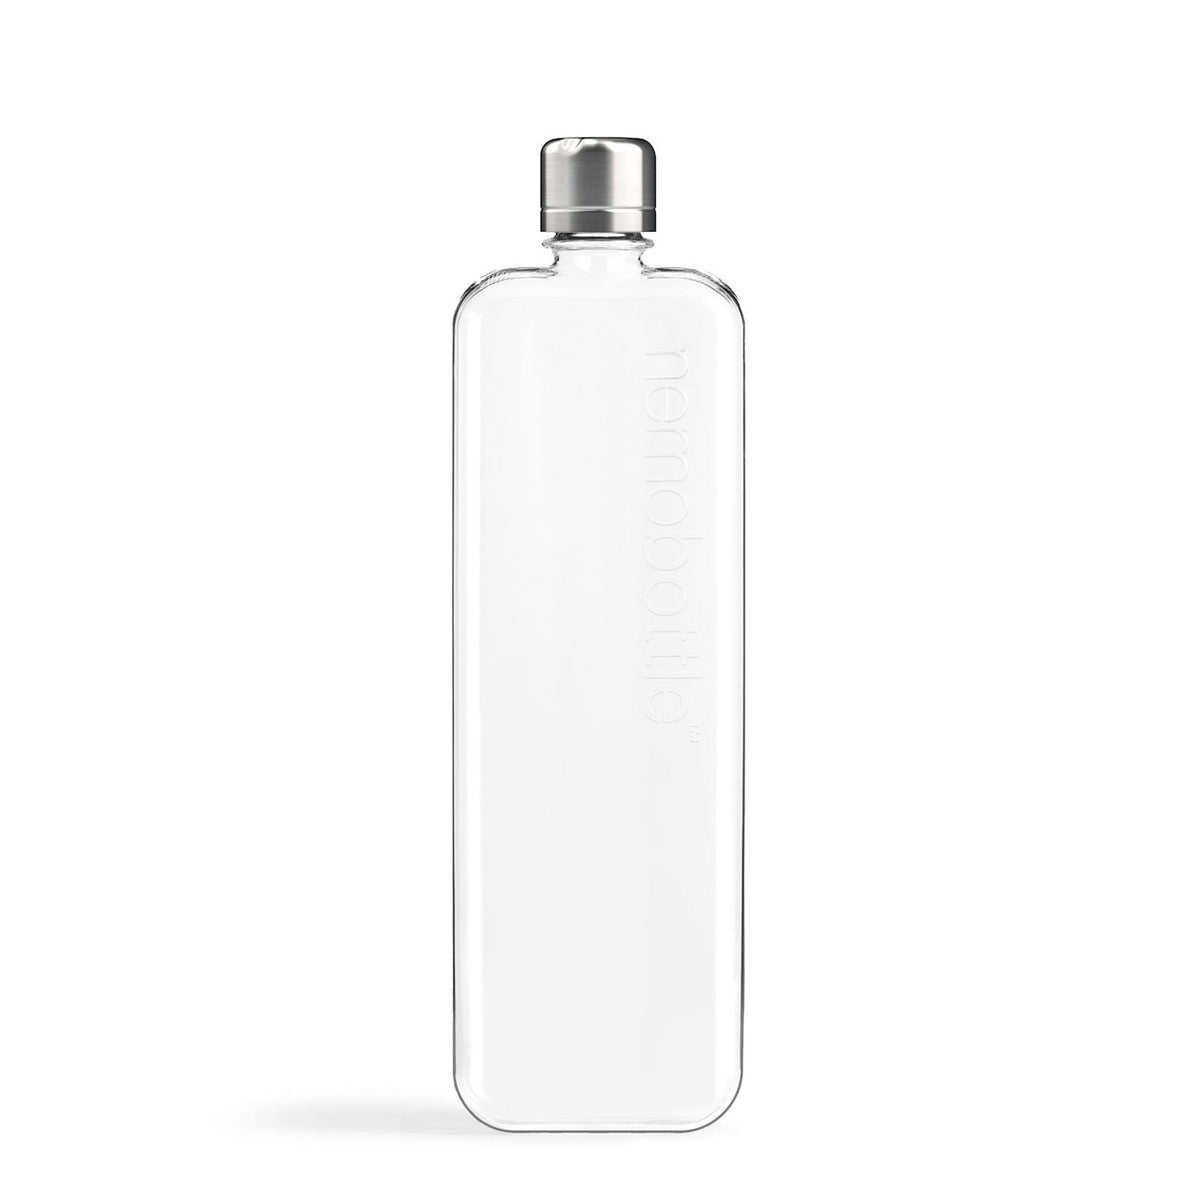 The Memobottle Makes Carrying Water a Cinch - The Manual